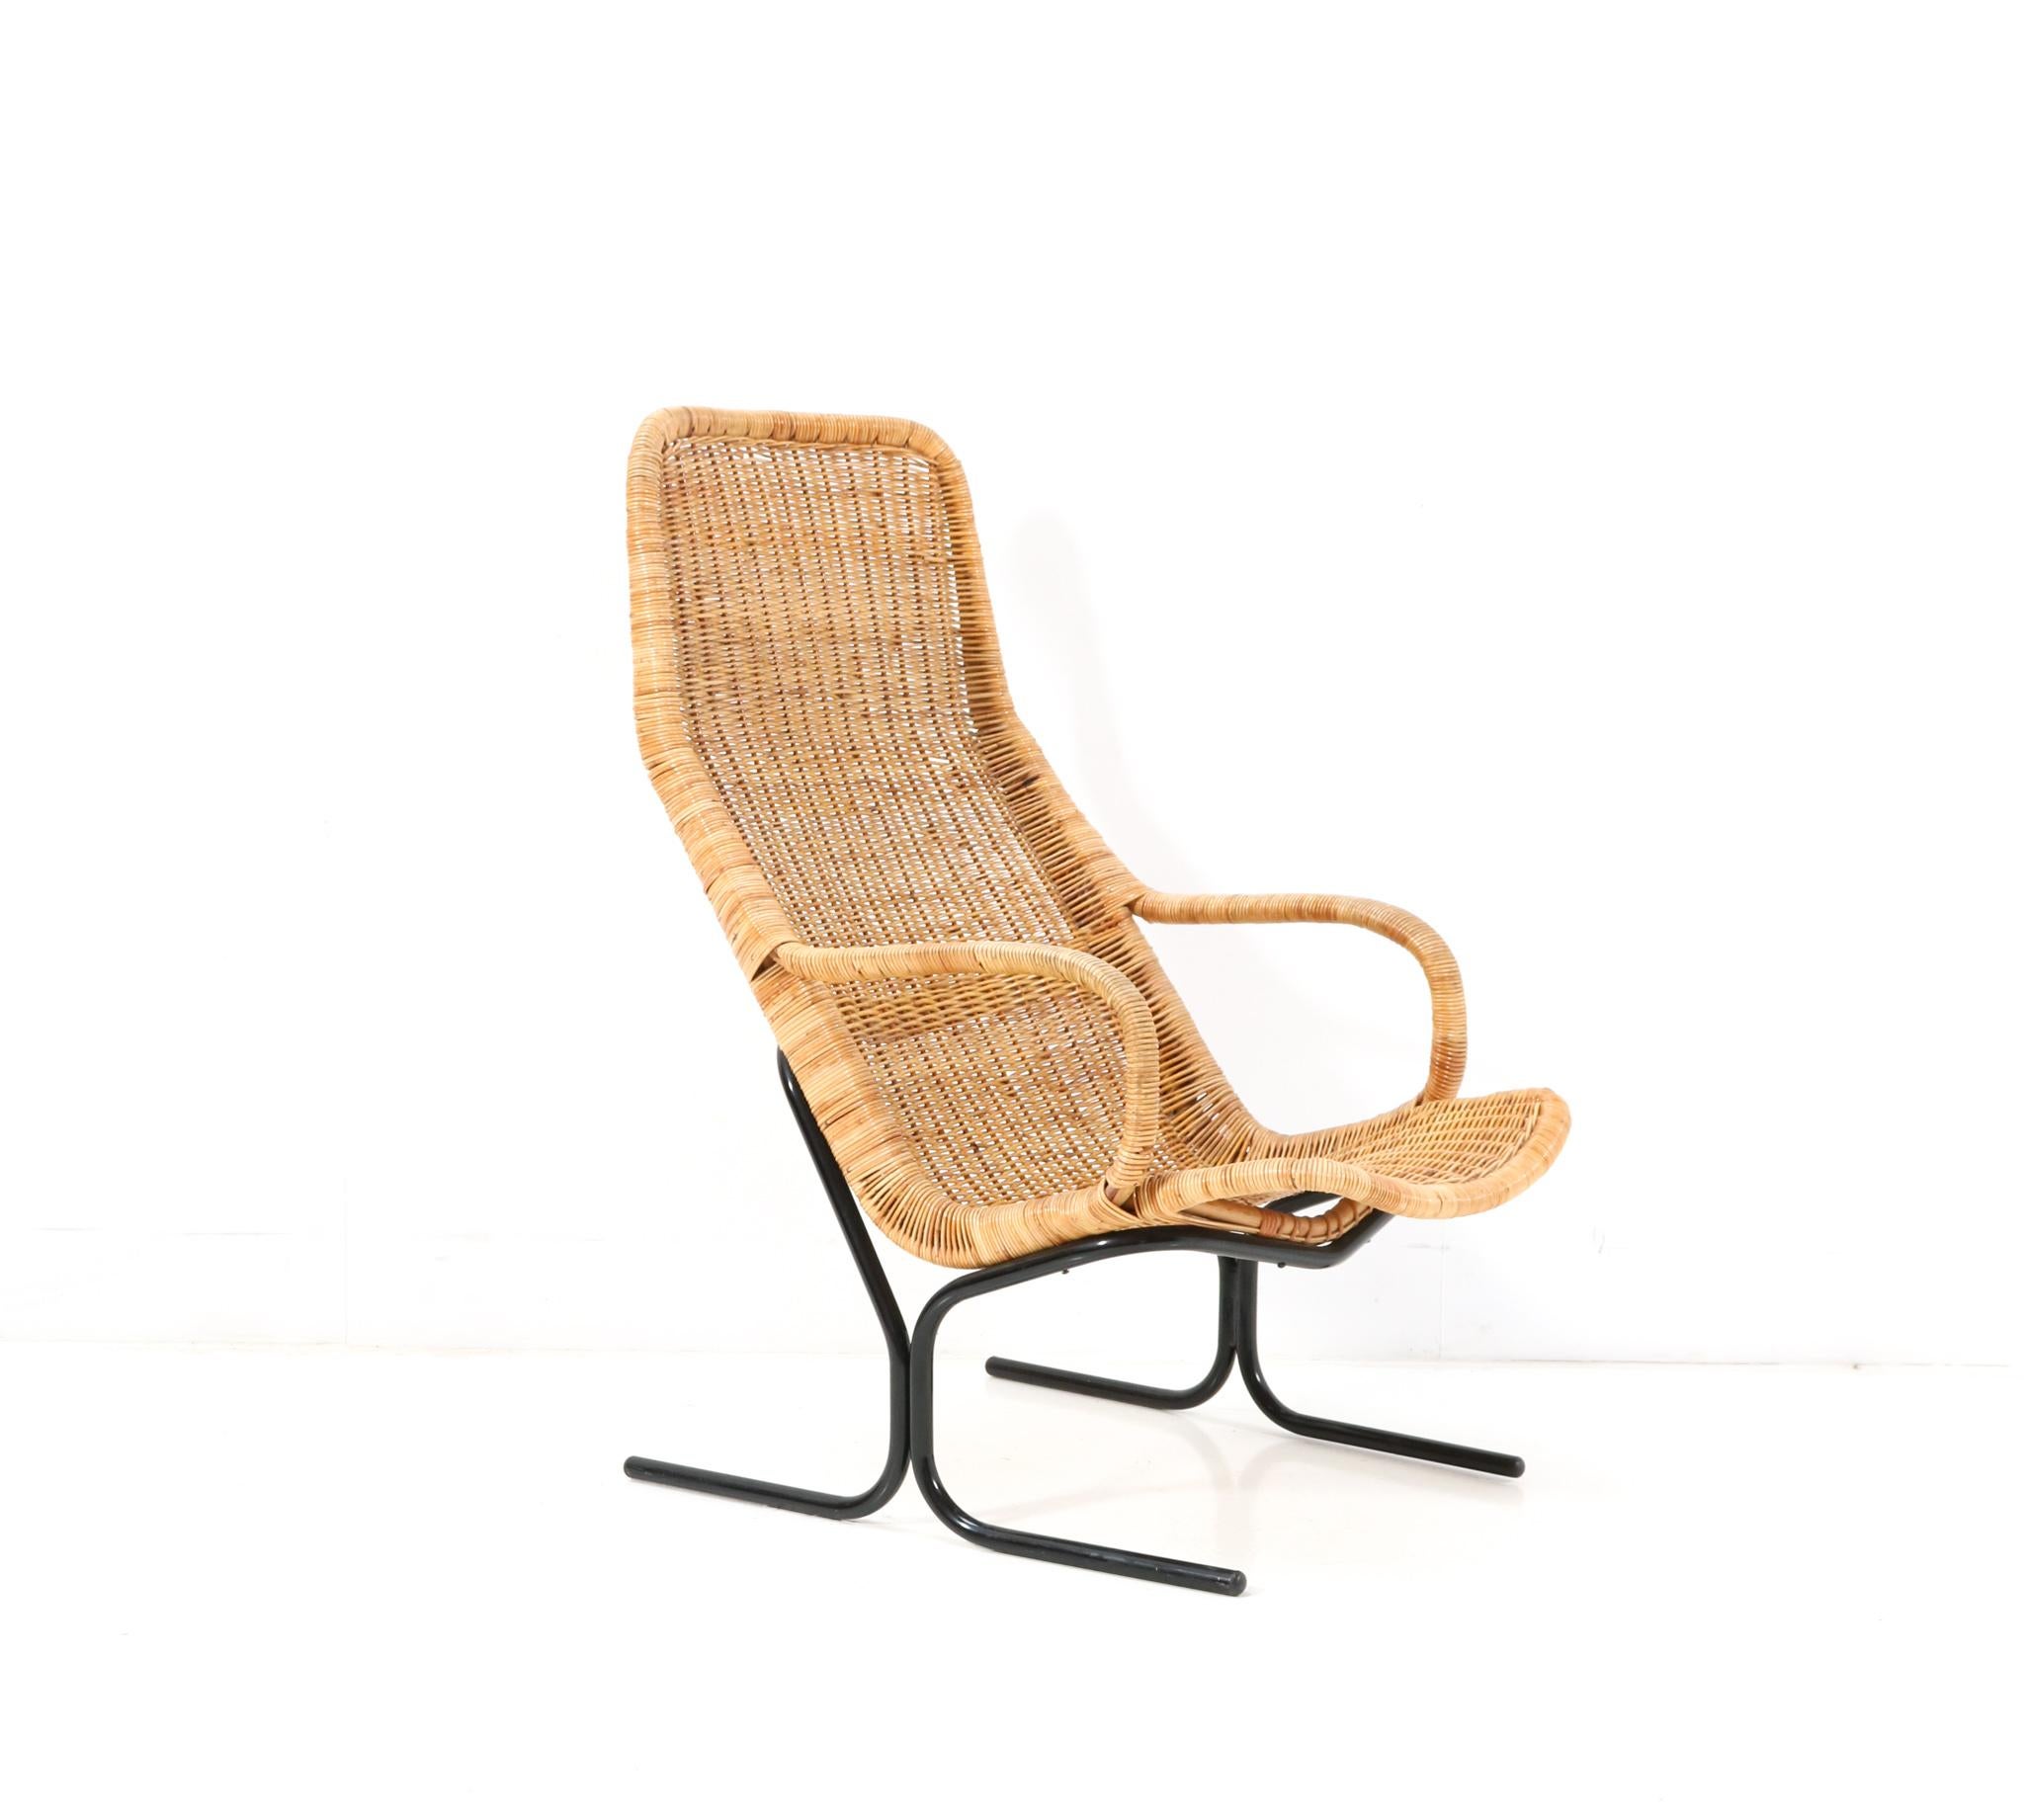 Lacquered Wicker Mid-Century Modern 514 Lounge Chair by Dirk van Sliedrecht, 1961 For Sale